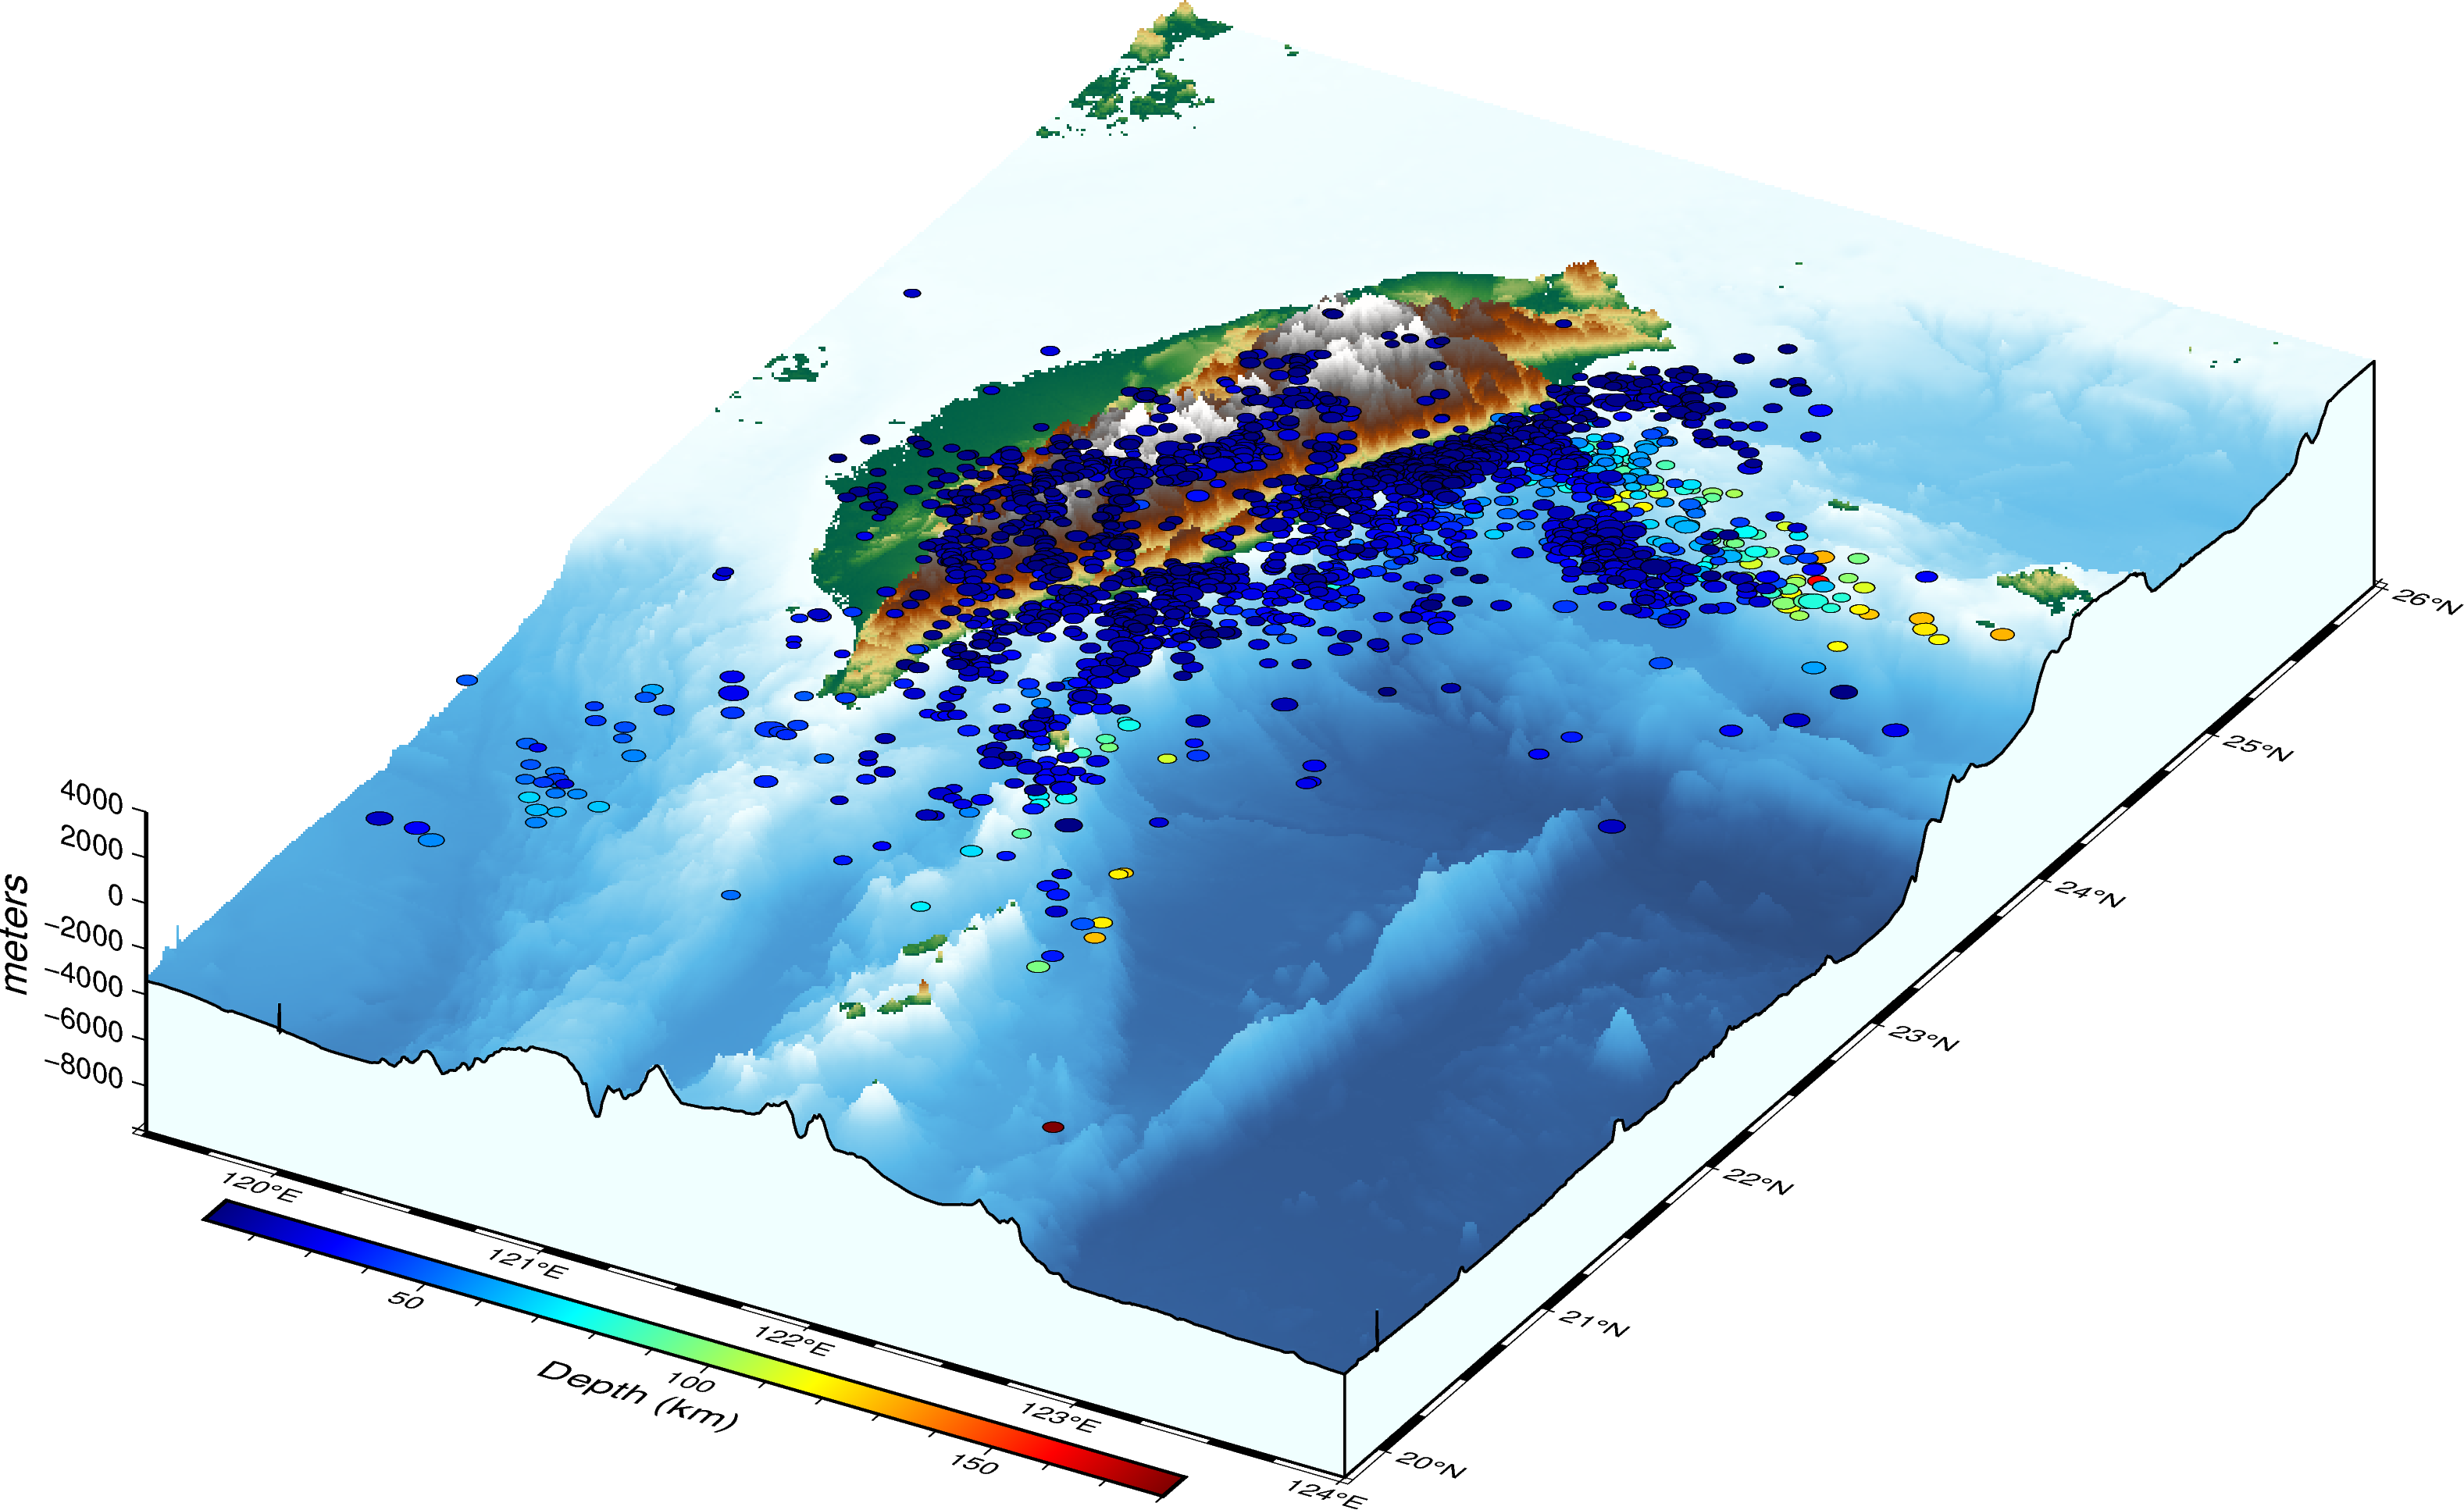 How to plot earthquakes data on a three-dimensional topographic map
